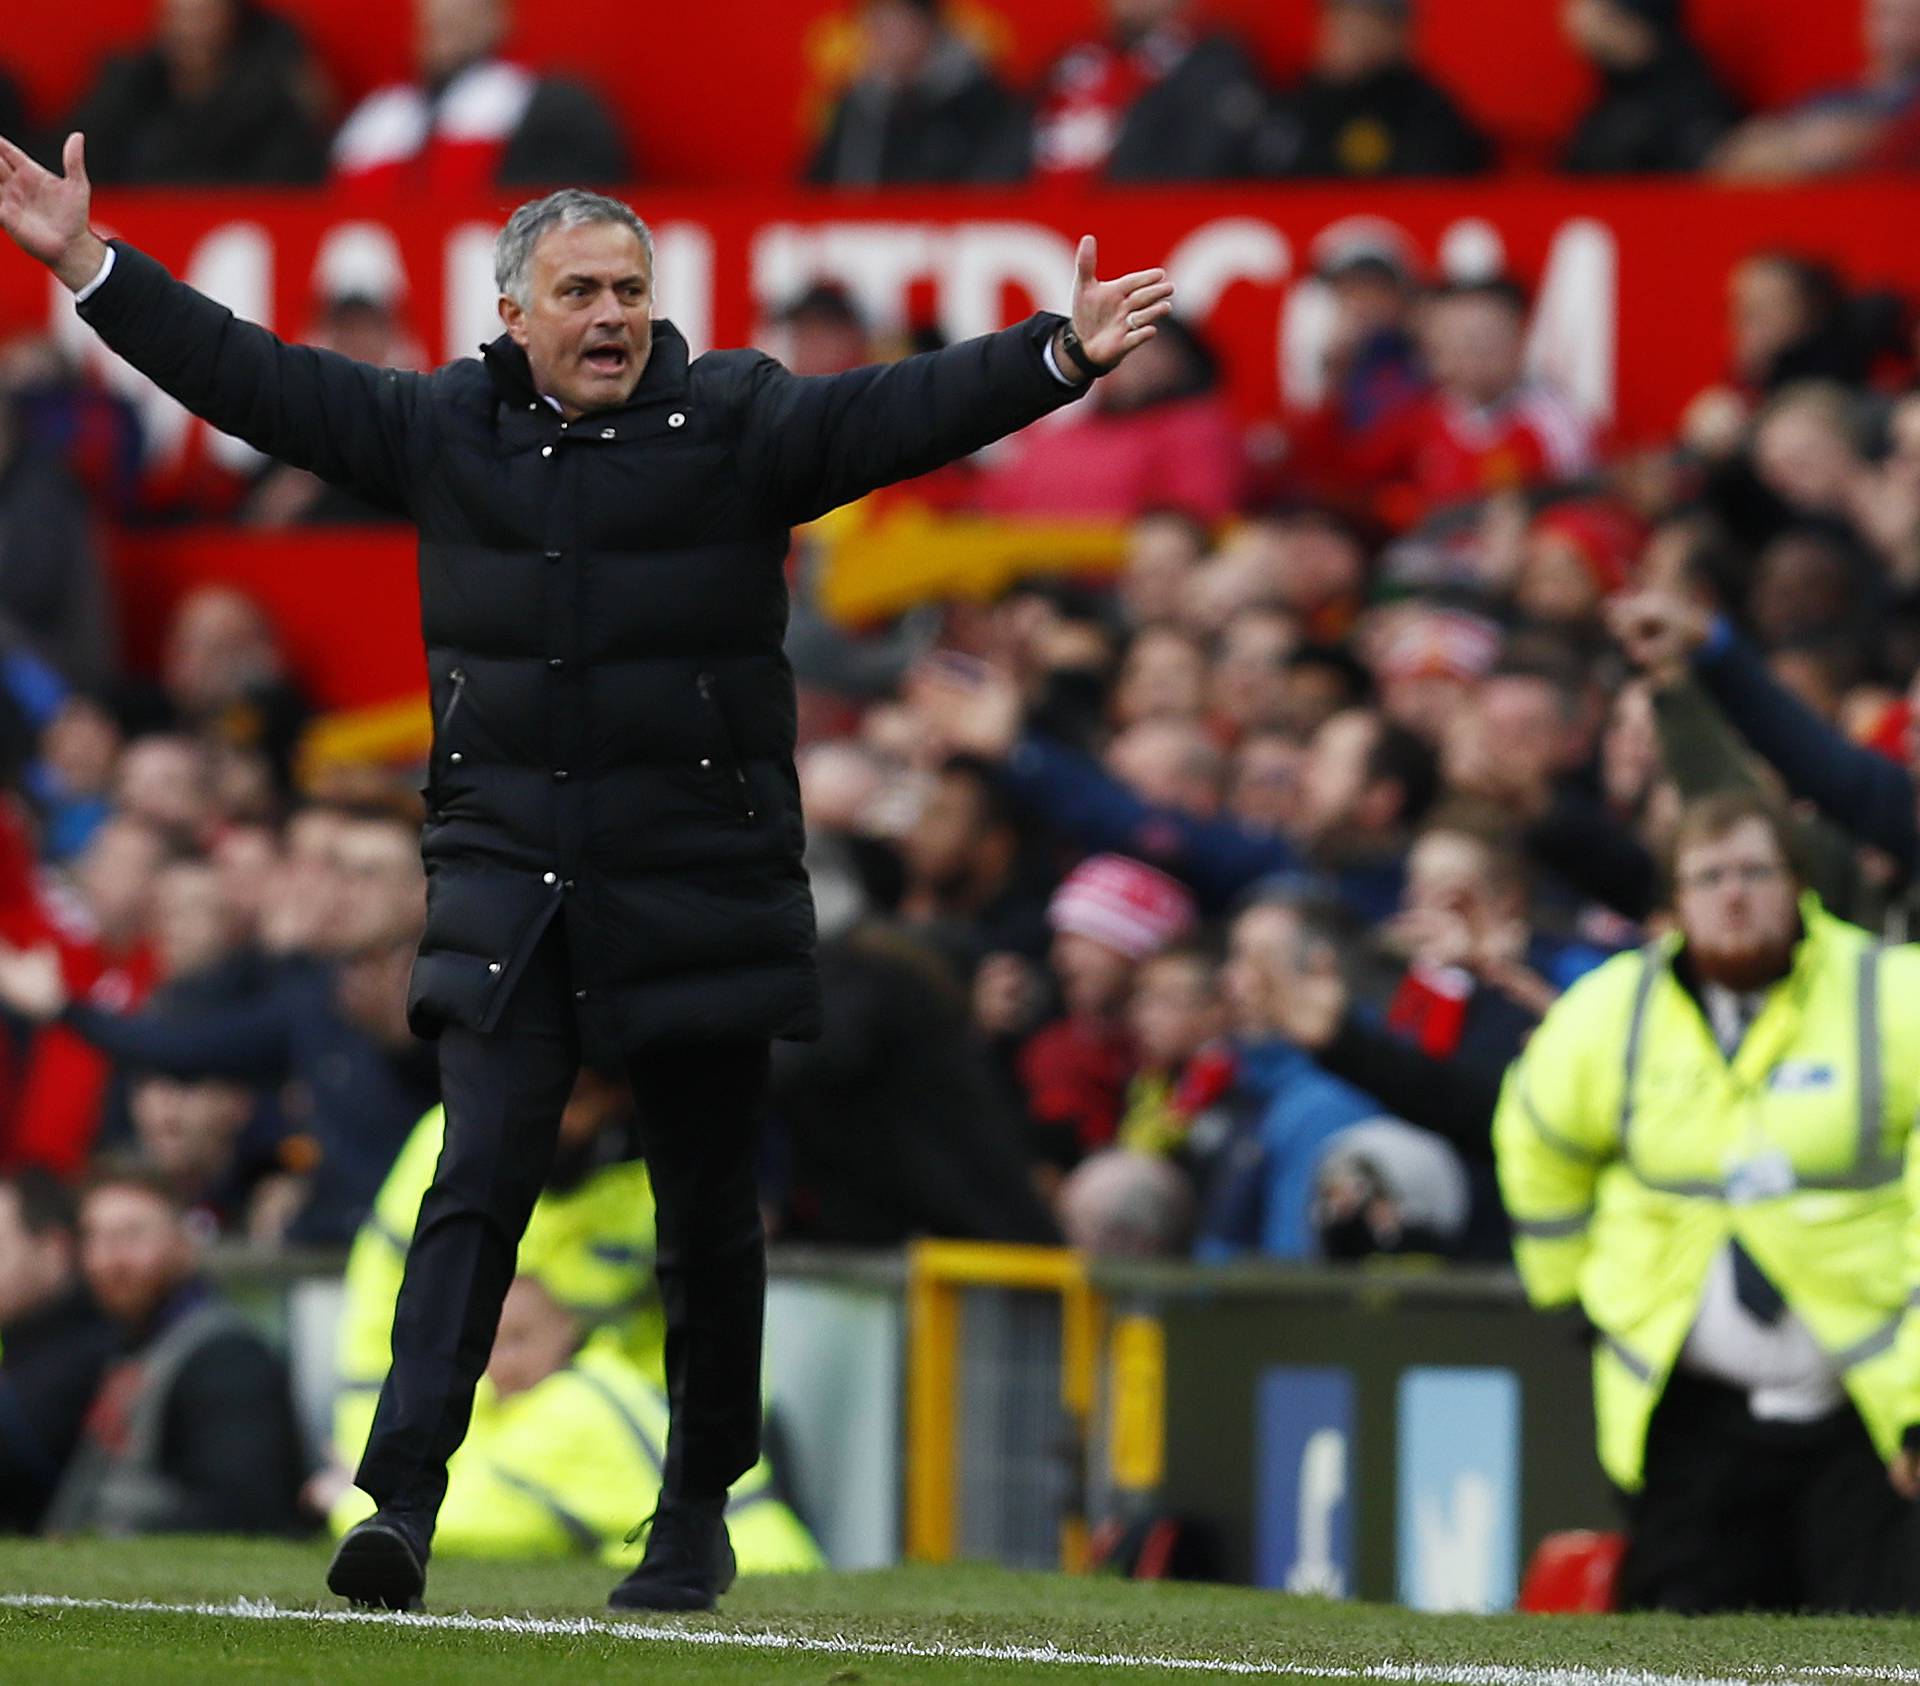 Manchester United manager Jose Mourinho reacts after a penalty is not awarded to his side